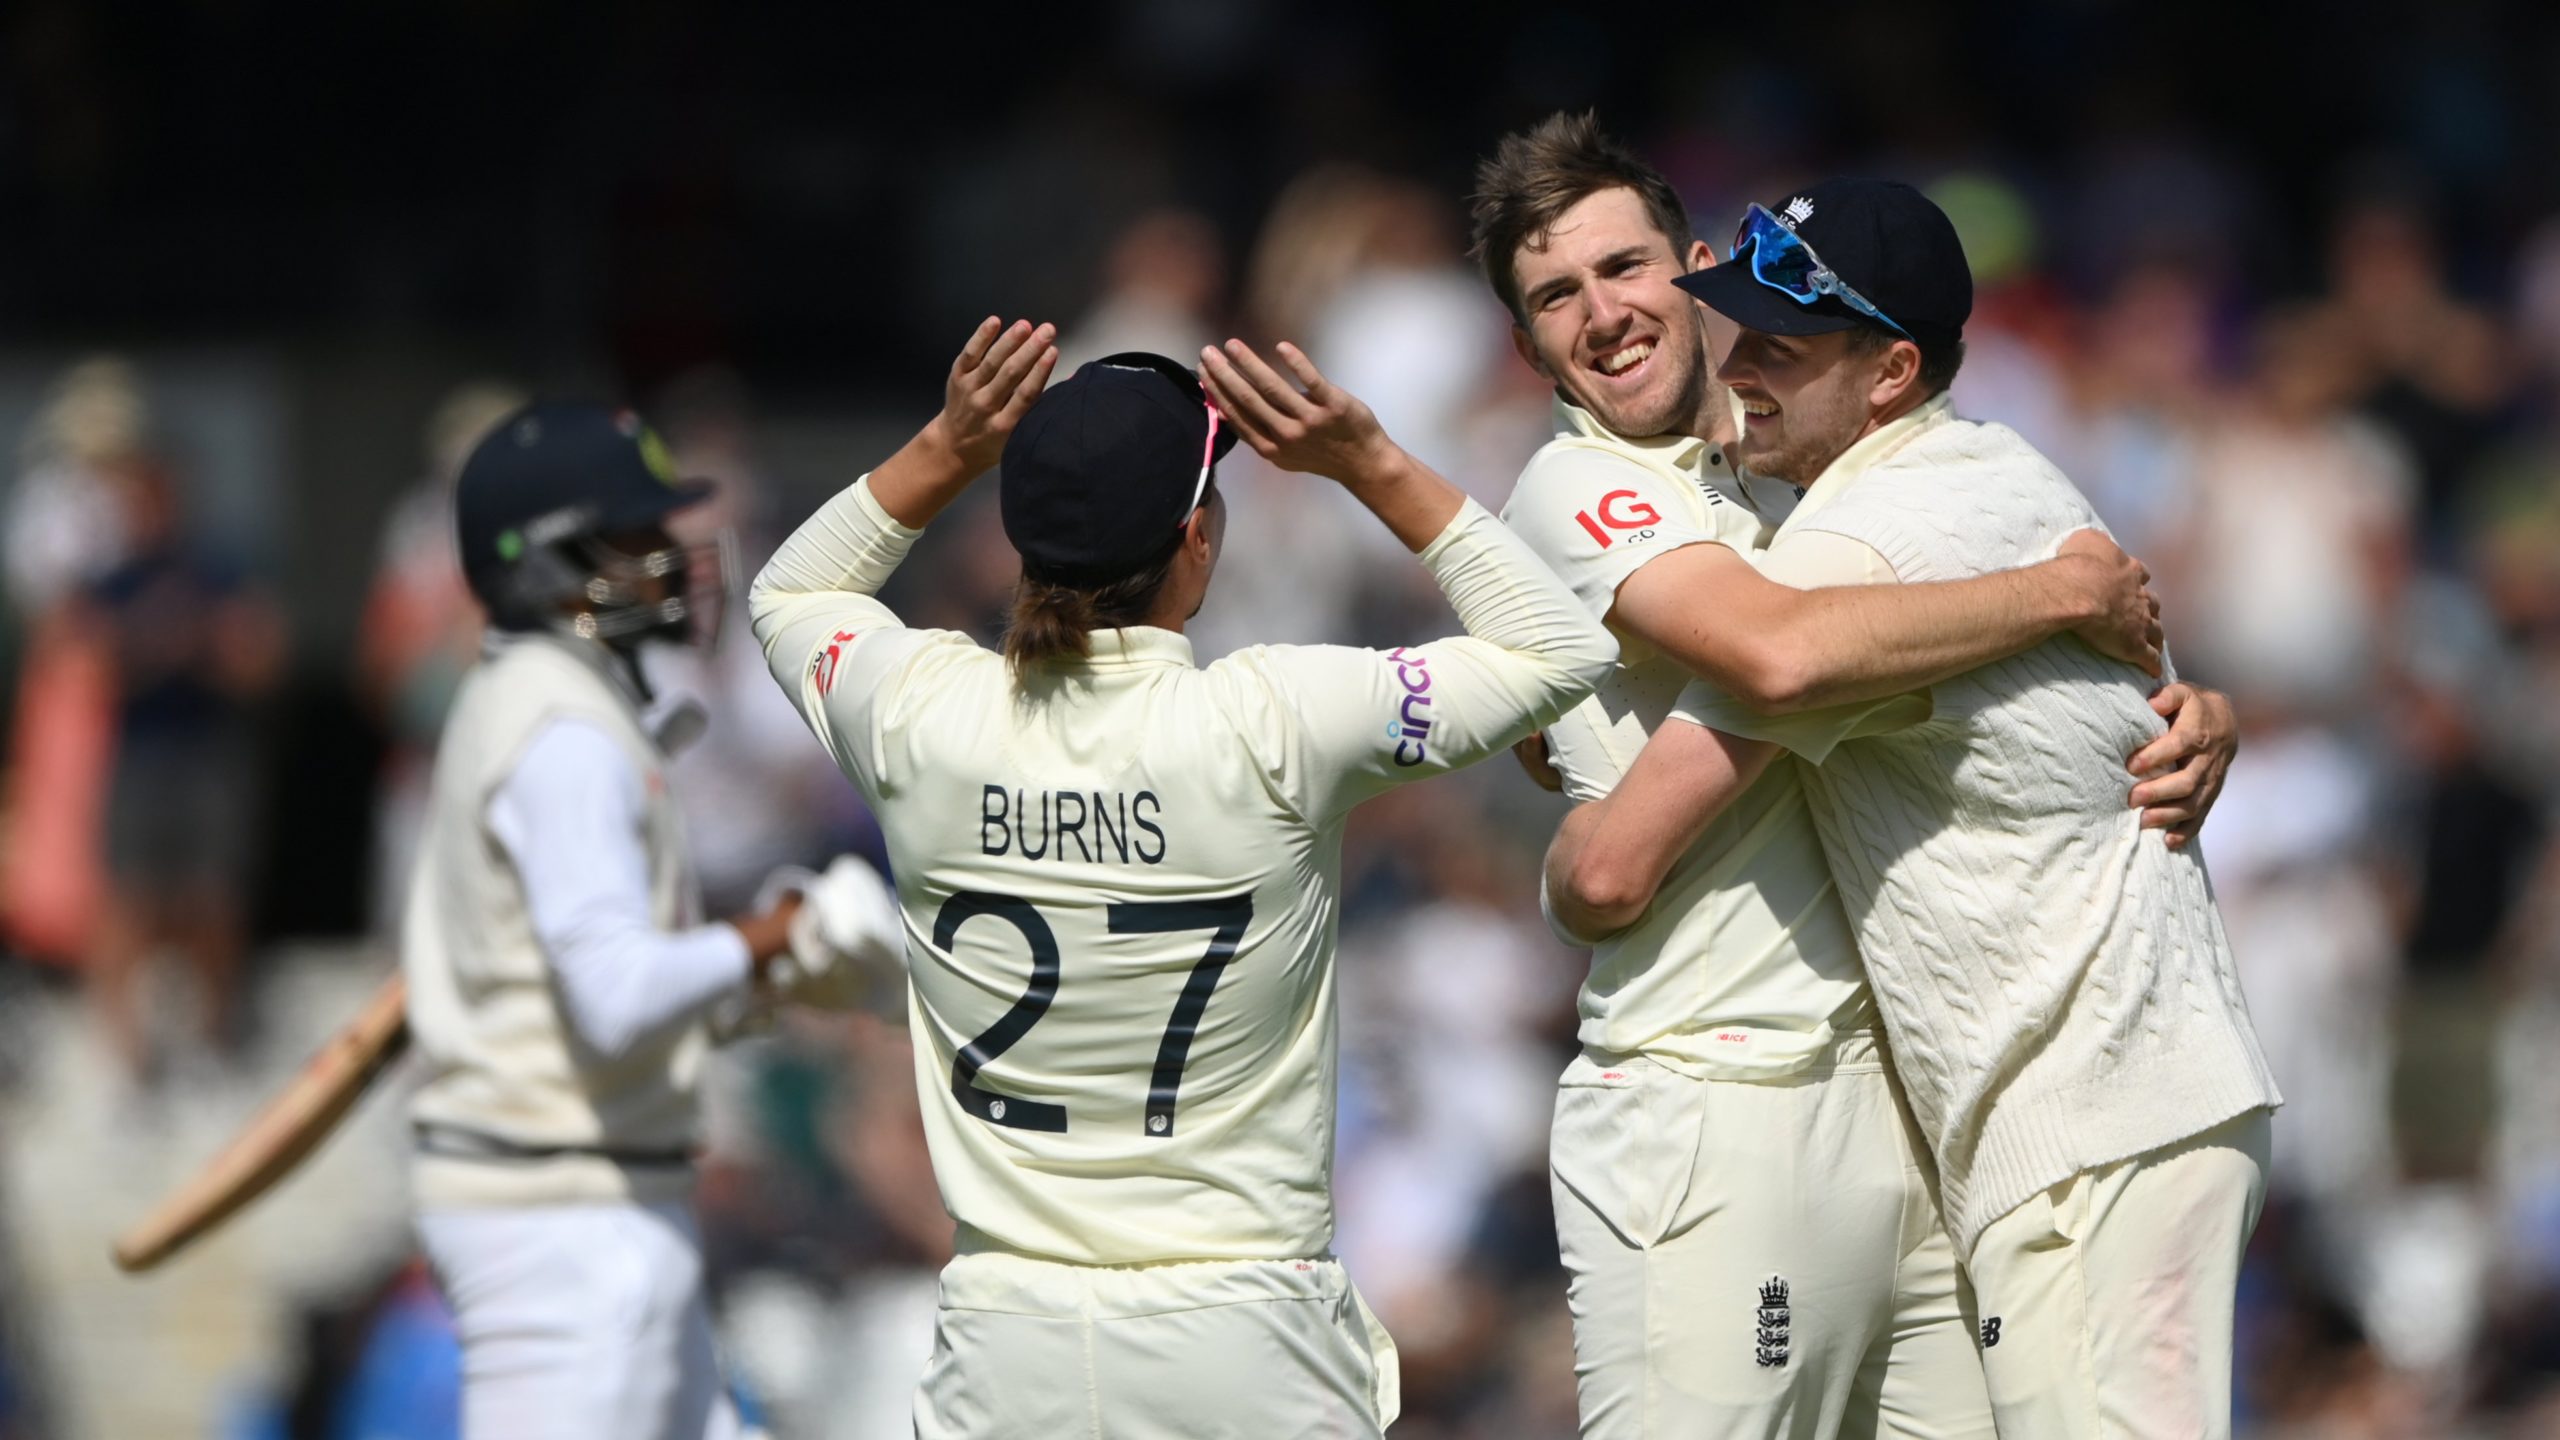 IND vs ENG Live: Virat Kohli’s India suffer humiliation at Headingley, lose by an innings and 76 runs as England level series 1-1